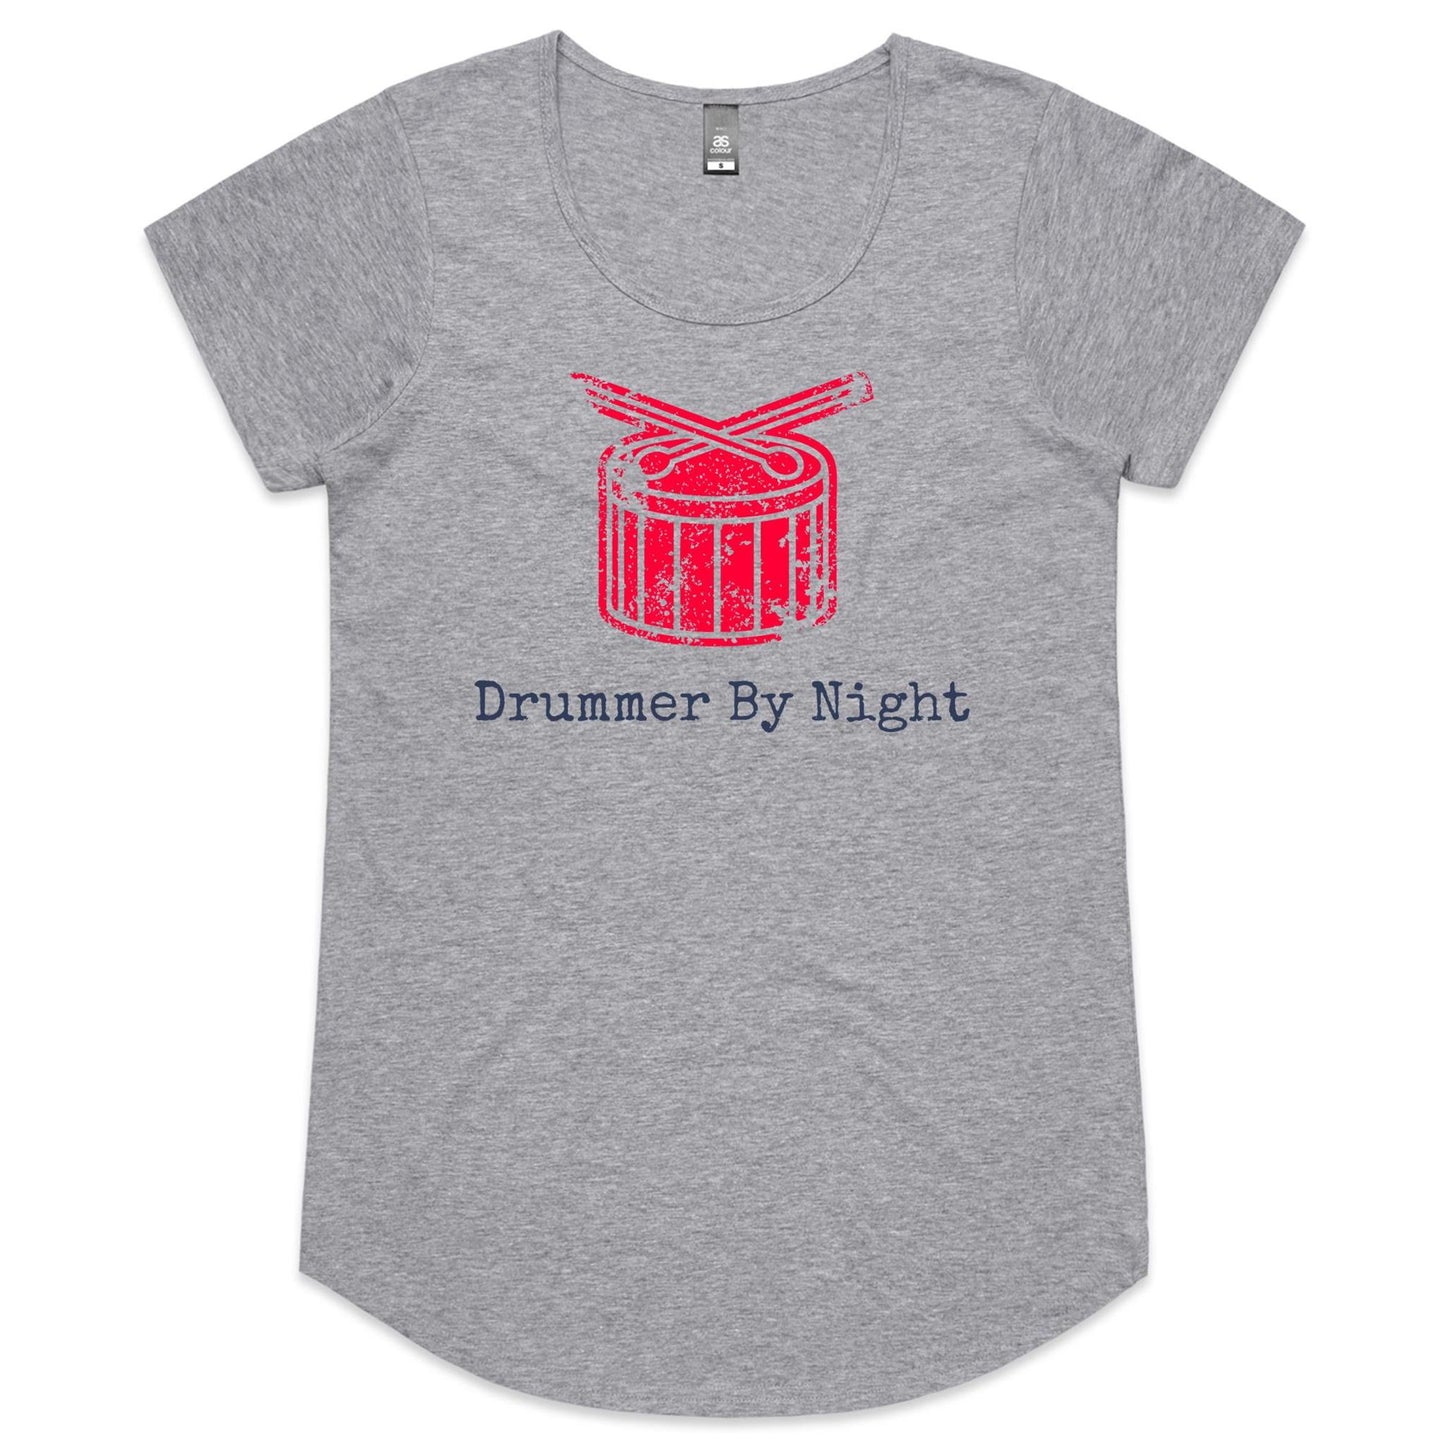 Drummer By Night - Womens Scoop Neck T-Shirt Grey Marle Womens Scoop Neck T-shirt Music